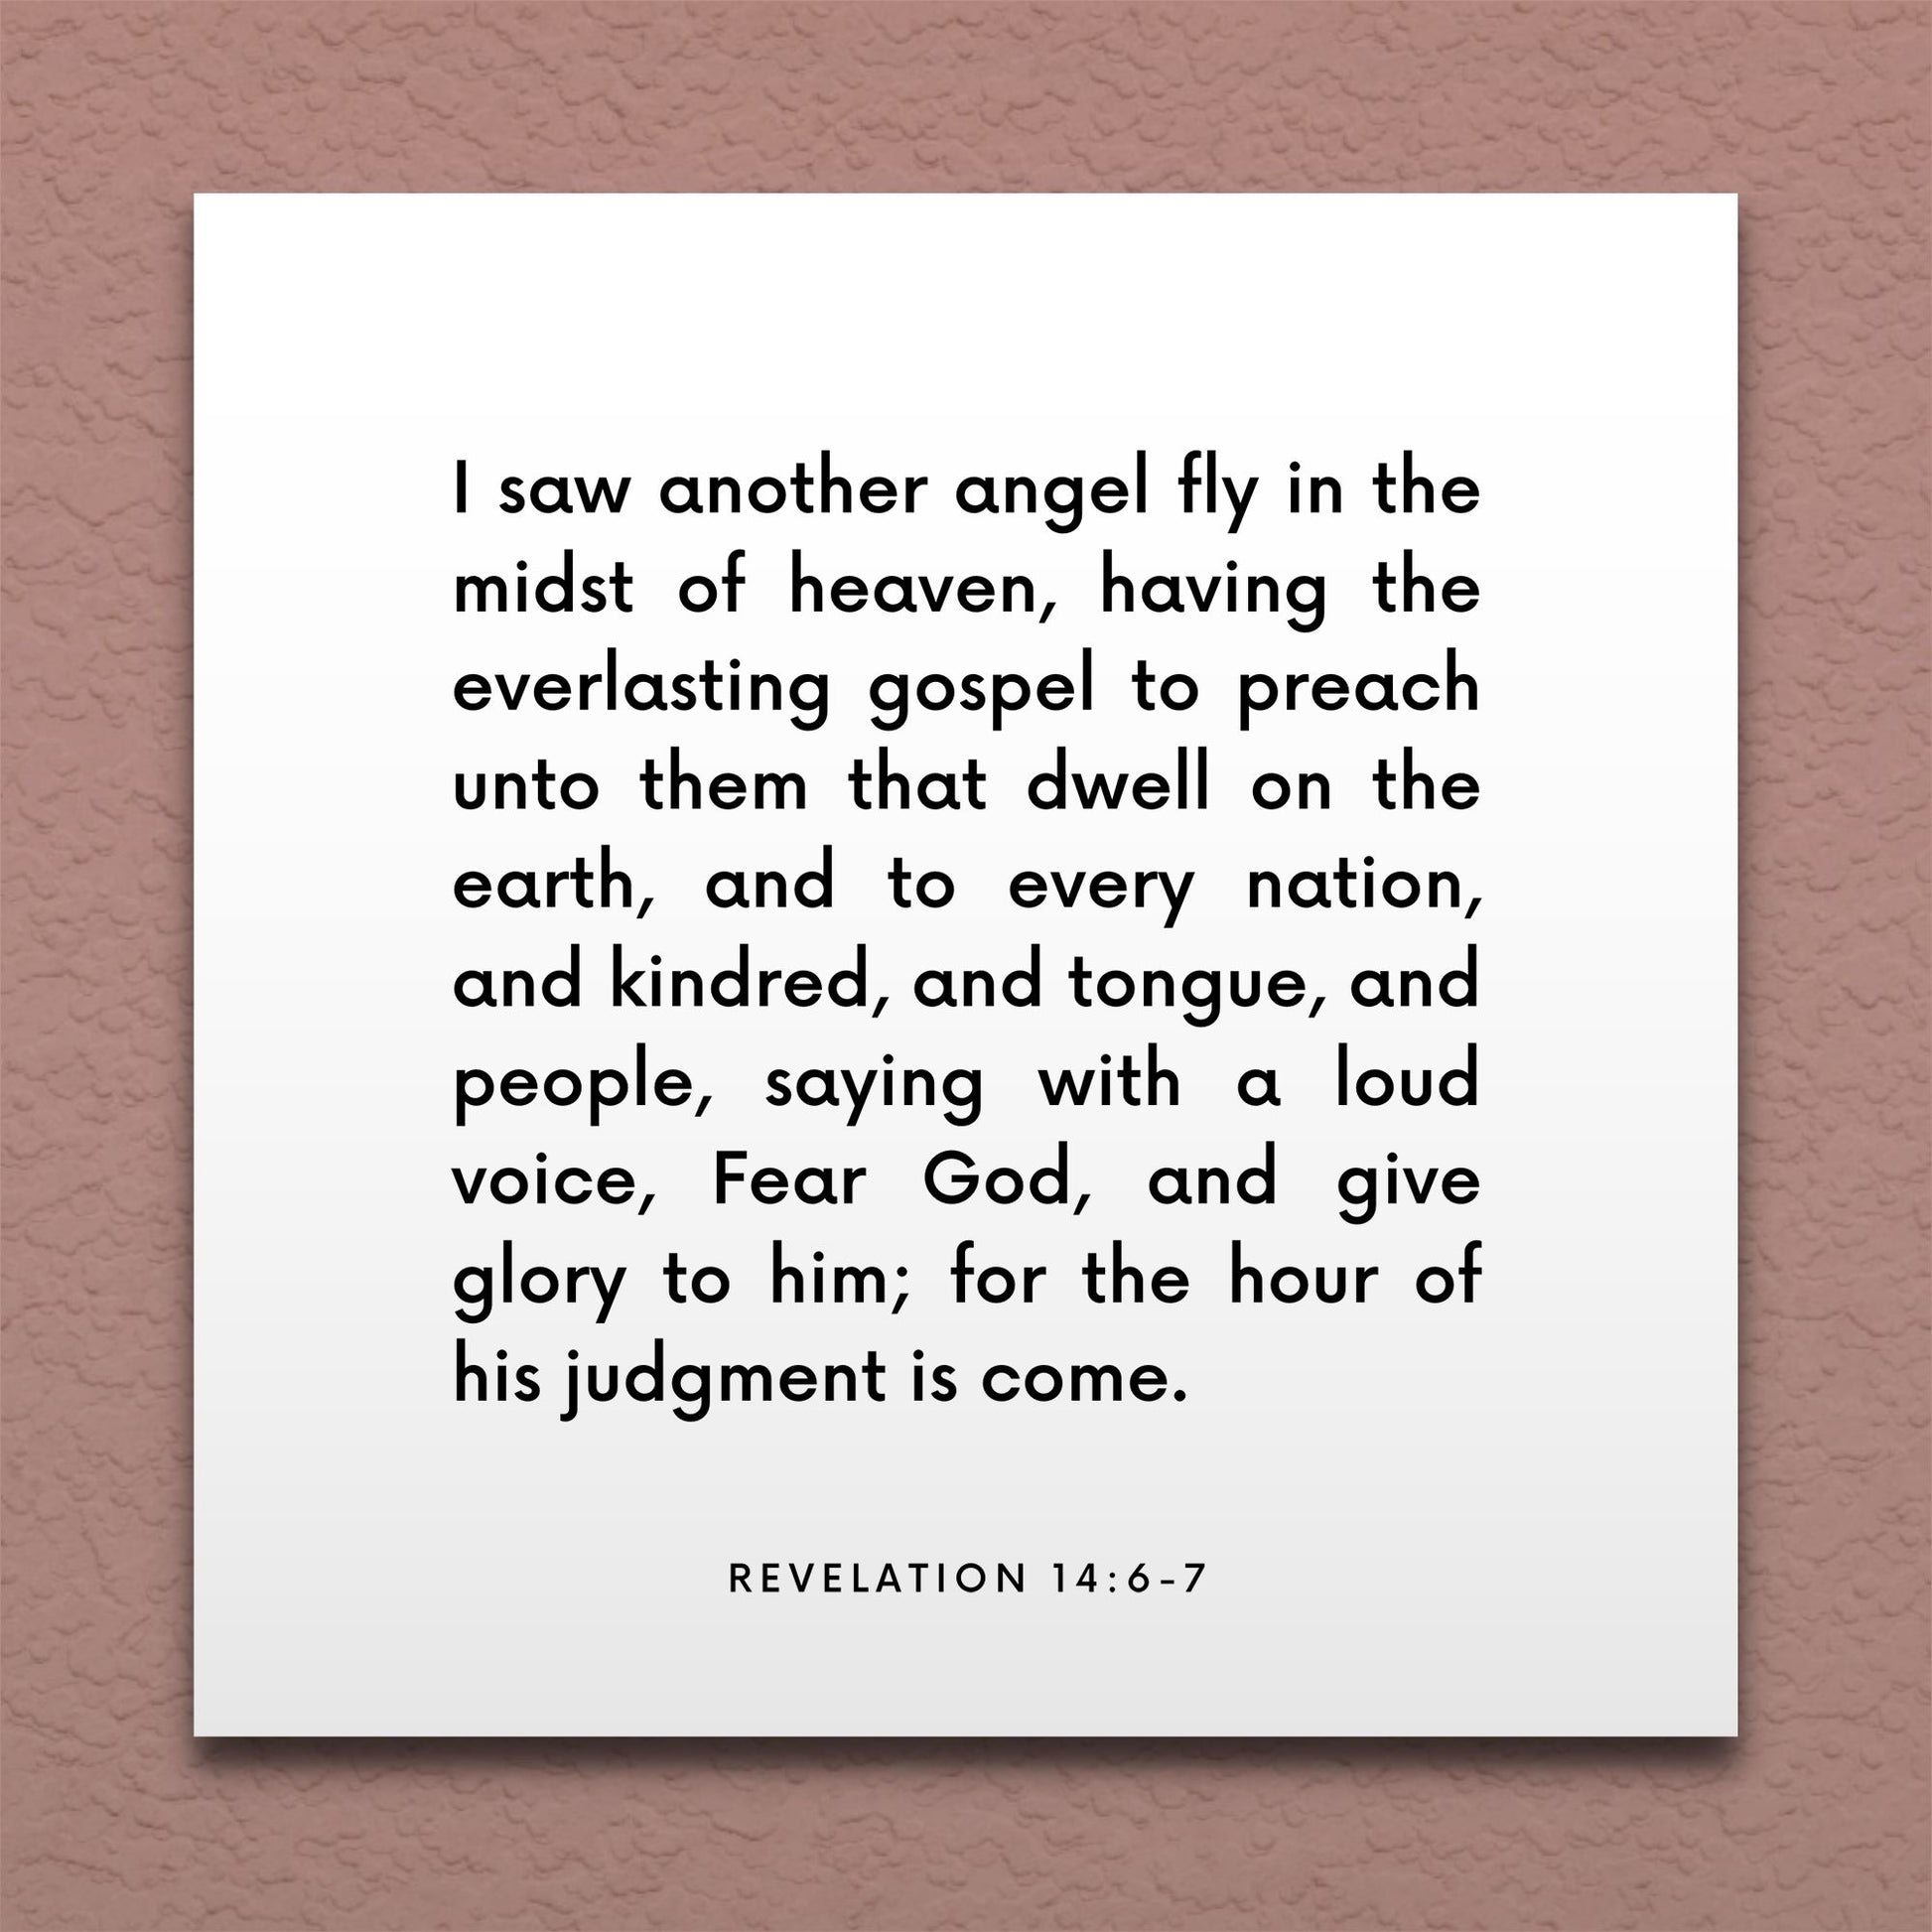 Wall-mounted scripture tile for Revelation 14:6-7 - "I saw another angel fly in the midst of heaven"